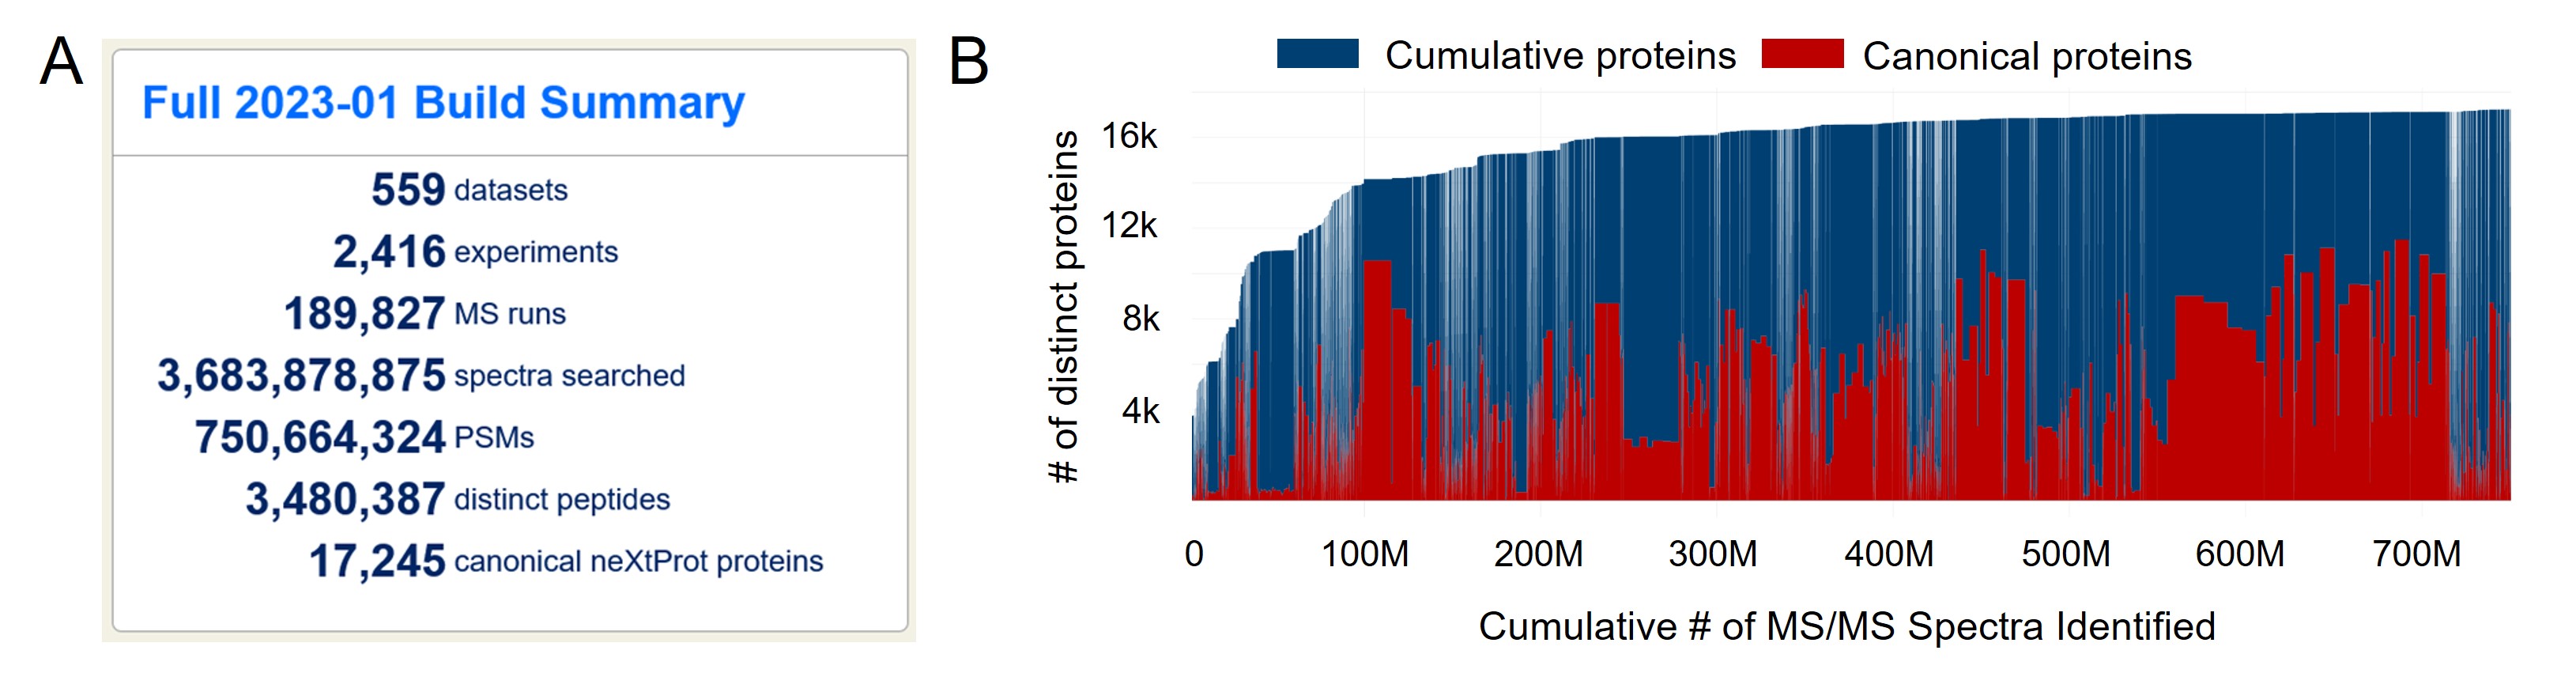 Figure 17: The Human PeptideAtlas as of 2023. A) The current total search space and identified elements of the 2023 Human PeptideAtlas. B) Historical cumulative plot of the identified total proteins (blue vertical bars) and the unique proteins identified per dataset (red vertical bars) over the total period of 2005-2023.